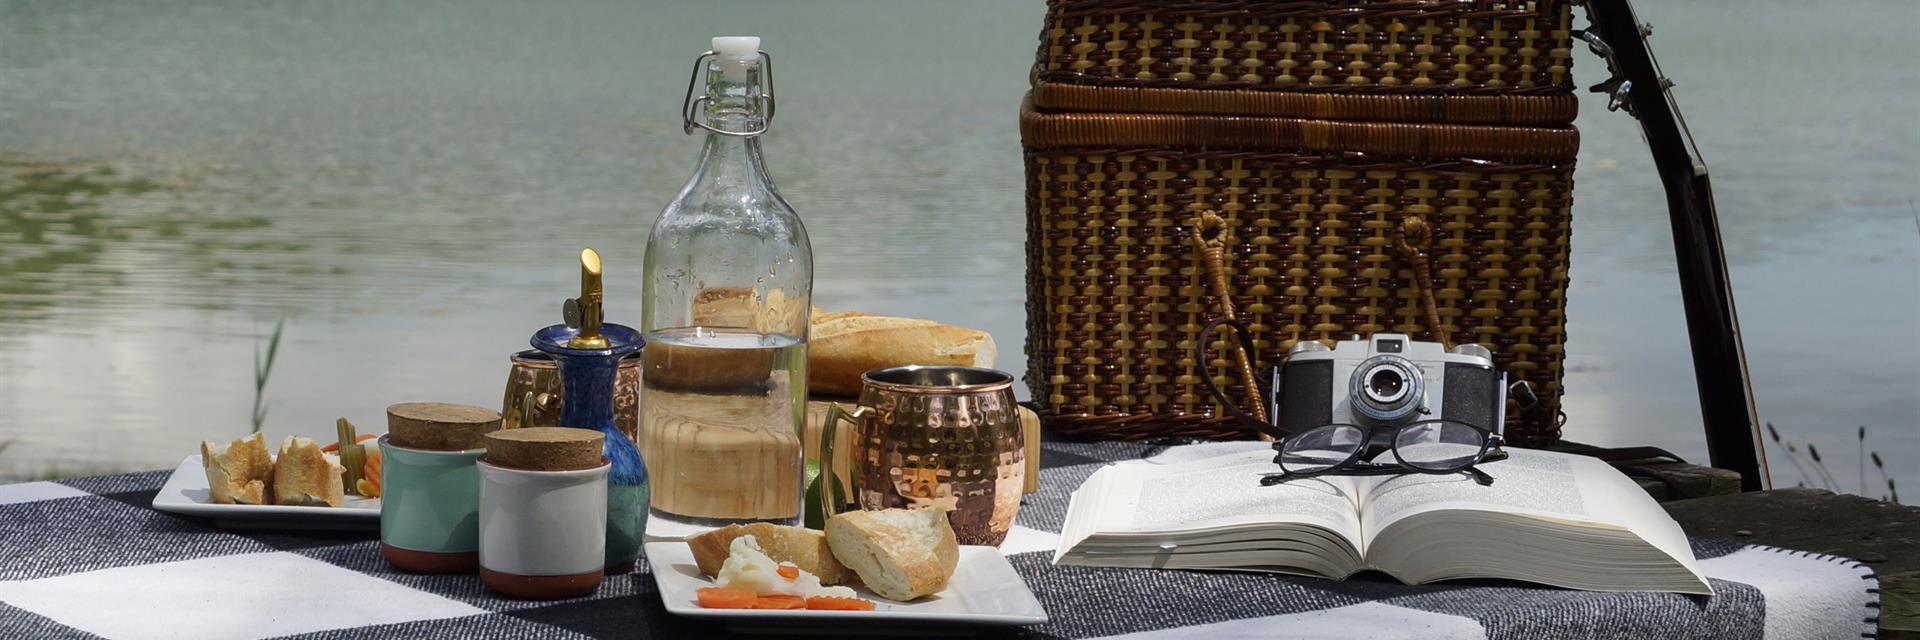 picnic basket on a picnic table in front of a lake